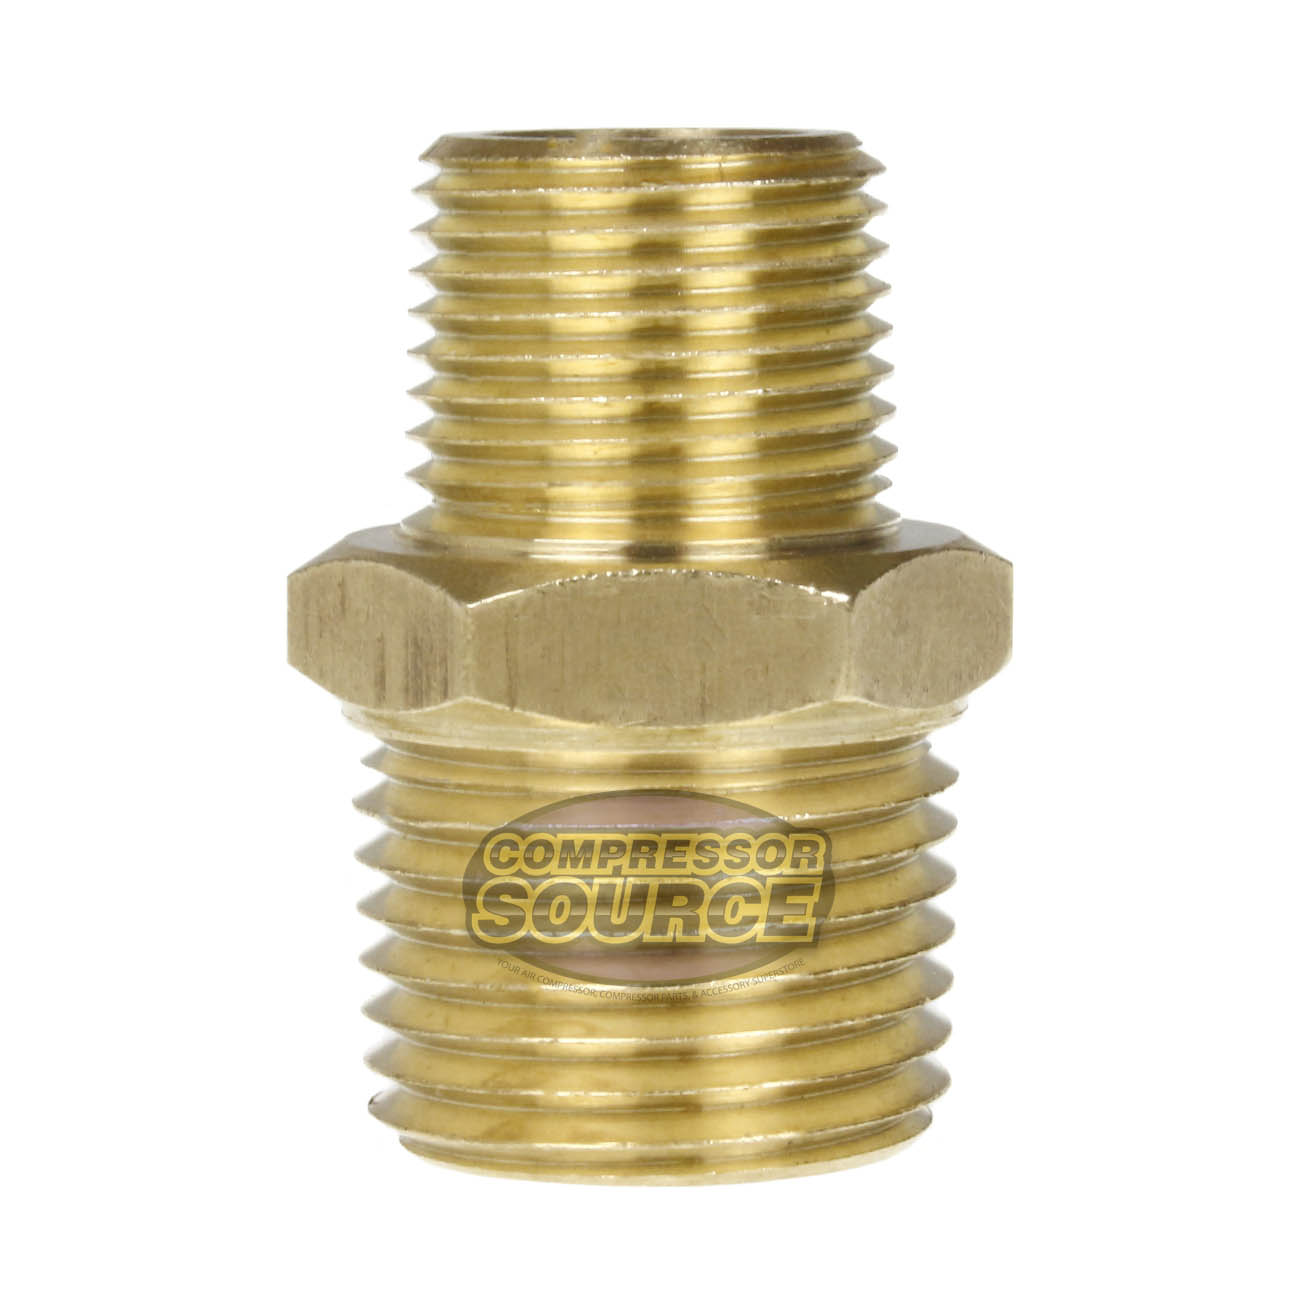 1/2" x 3/8" Male NPTF Pipe Reducing Hex Nipple Solid Brass Pipe Fitting New